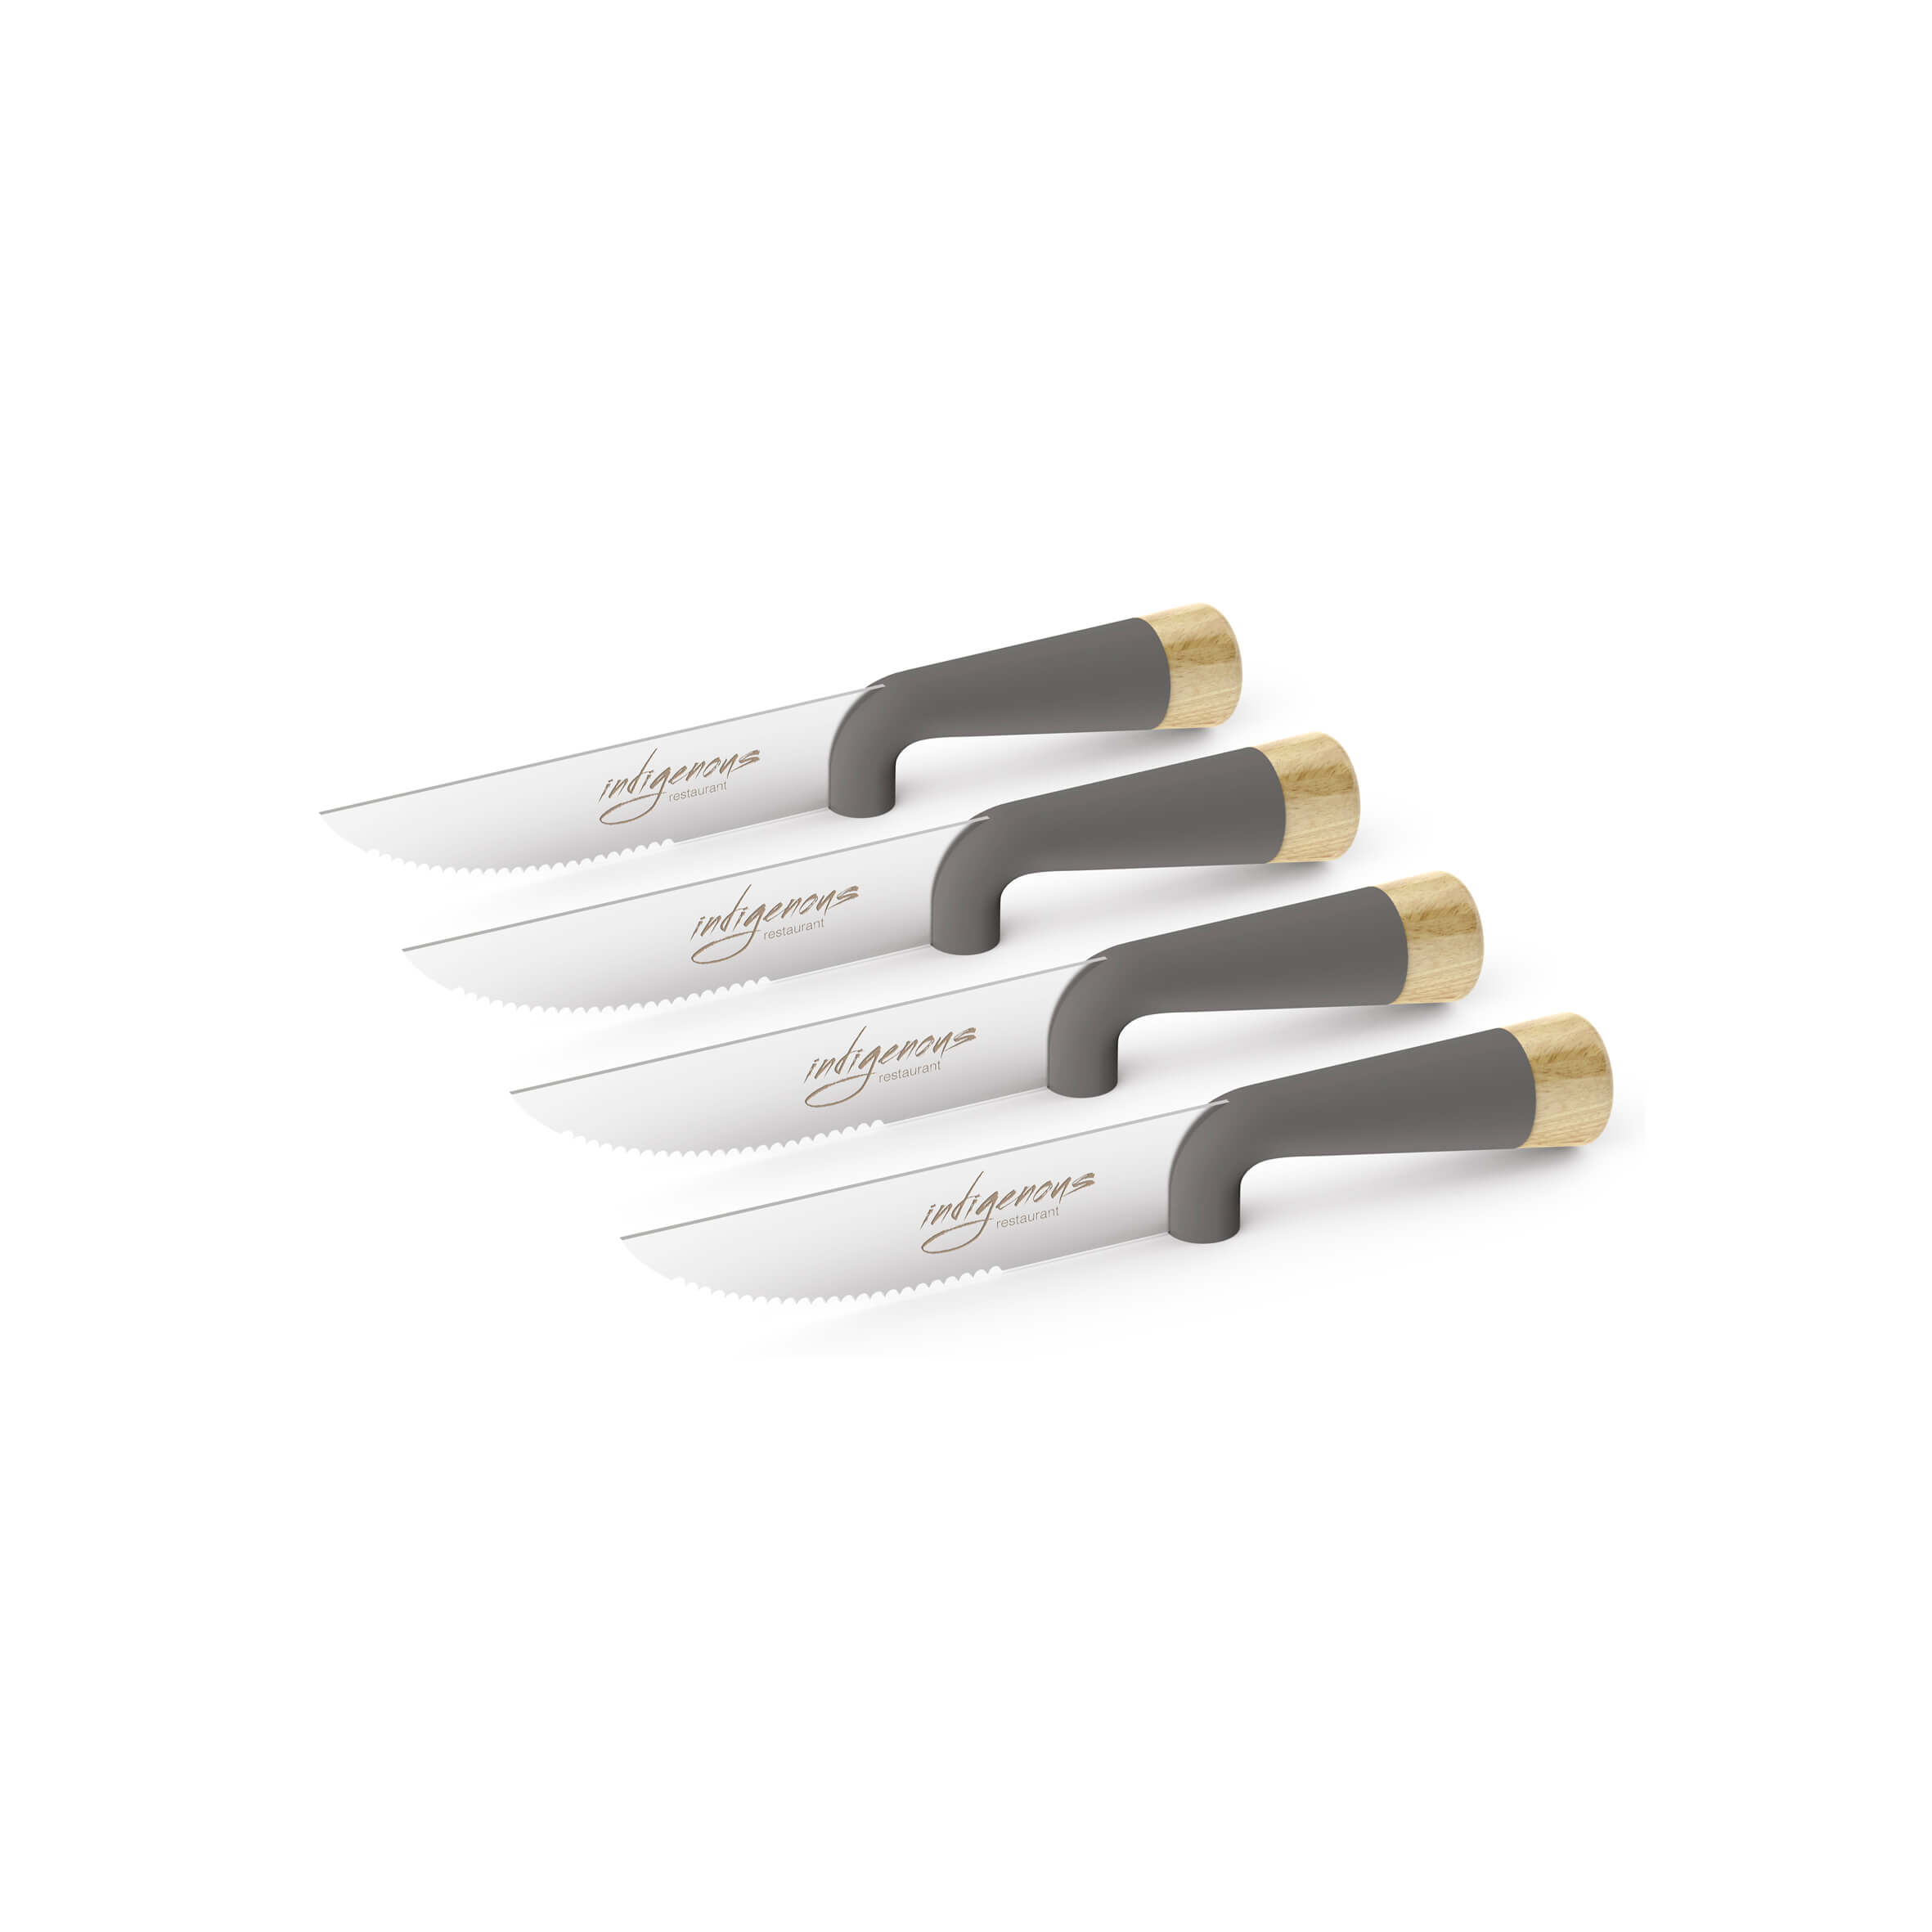 Andy Cartwright ‘The Final Cut’ Steak Knife Set Giftsets